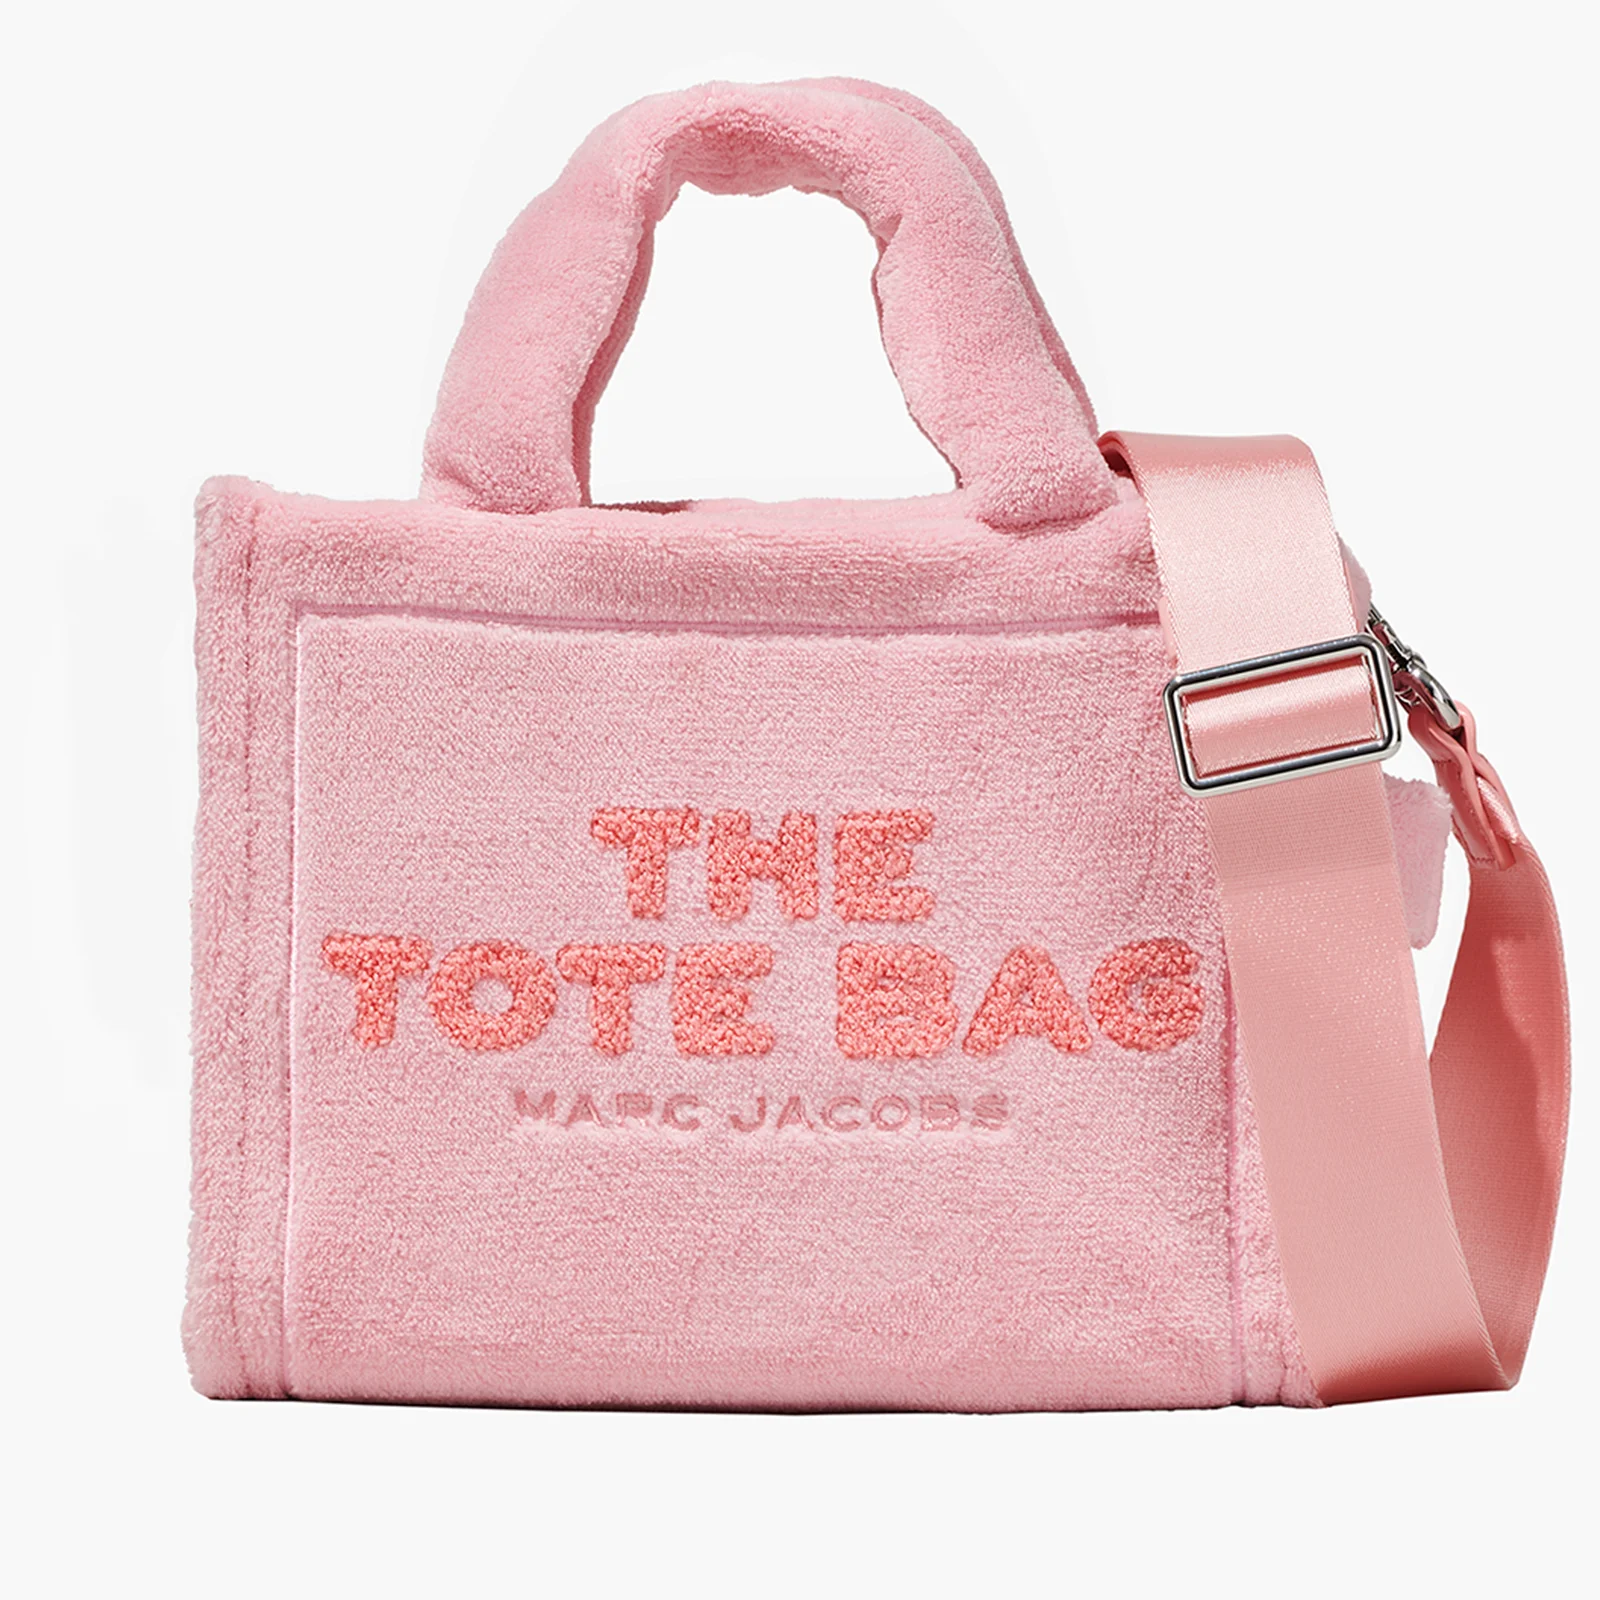 Marc Jacobs The Medium Terry Tote Bag Image 1